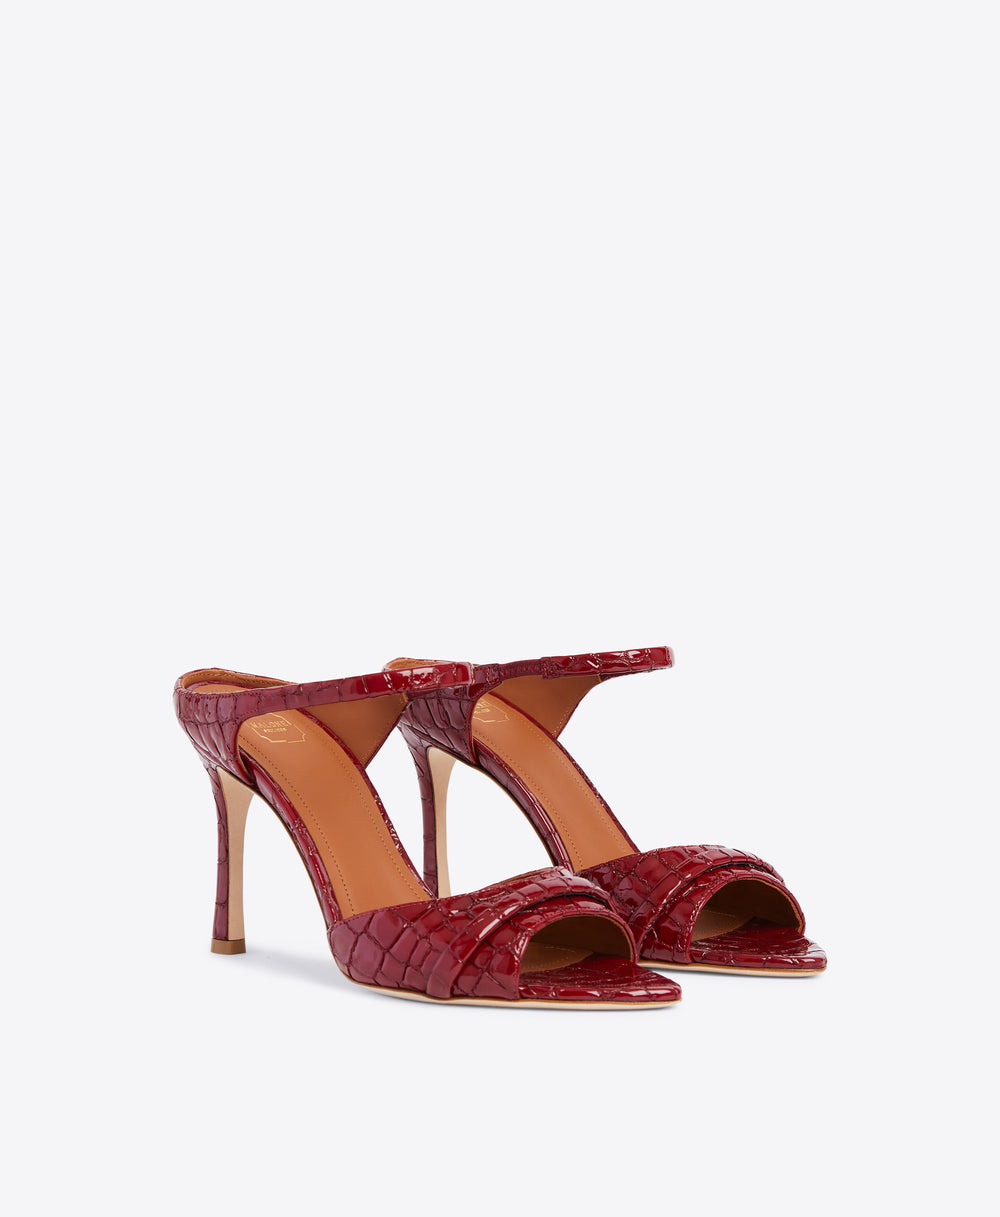 Two-Part Burgundy Sandals - Strap on Flared Stiletto | Malone Souliers